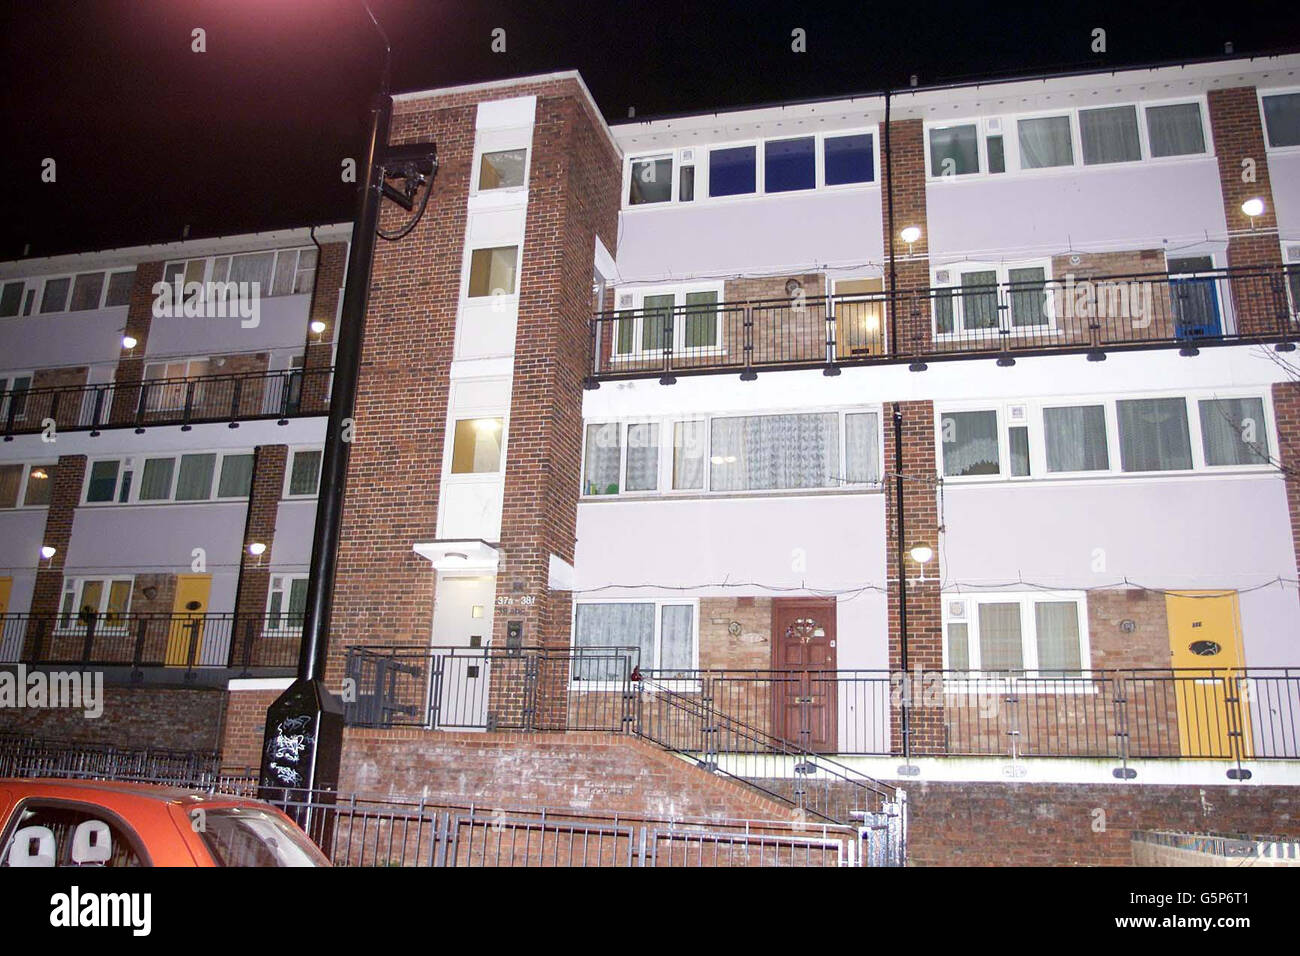 The block of flats in Woolwich, south London, where the bodies of Stanley Gardner, 79, and his wife Eileen, 83 were found suffocated in their bed. The couple's 57-year-old son, named by neighbours as Daniel Gardner was arrested today on suspicion of murdering his parents after answering the door to a nurse and home help when they made a routine visit this morning. Mr Gardner was himself blood stained and was taken to Queen Elizabeth Hospital. His injuries are not life threatening and he is now under arrest. Detectives are investigating the possibility of a planned mercy killing. Stock Photo